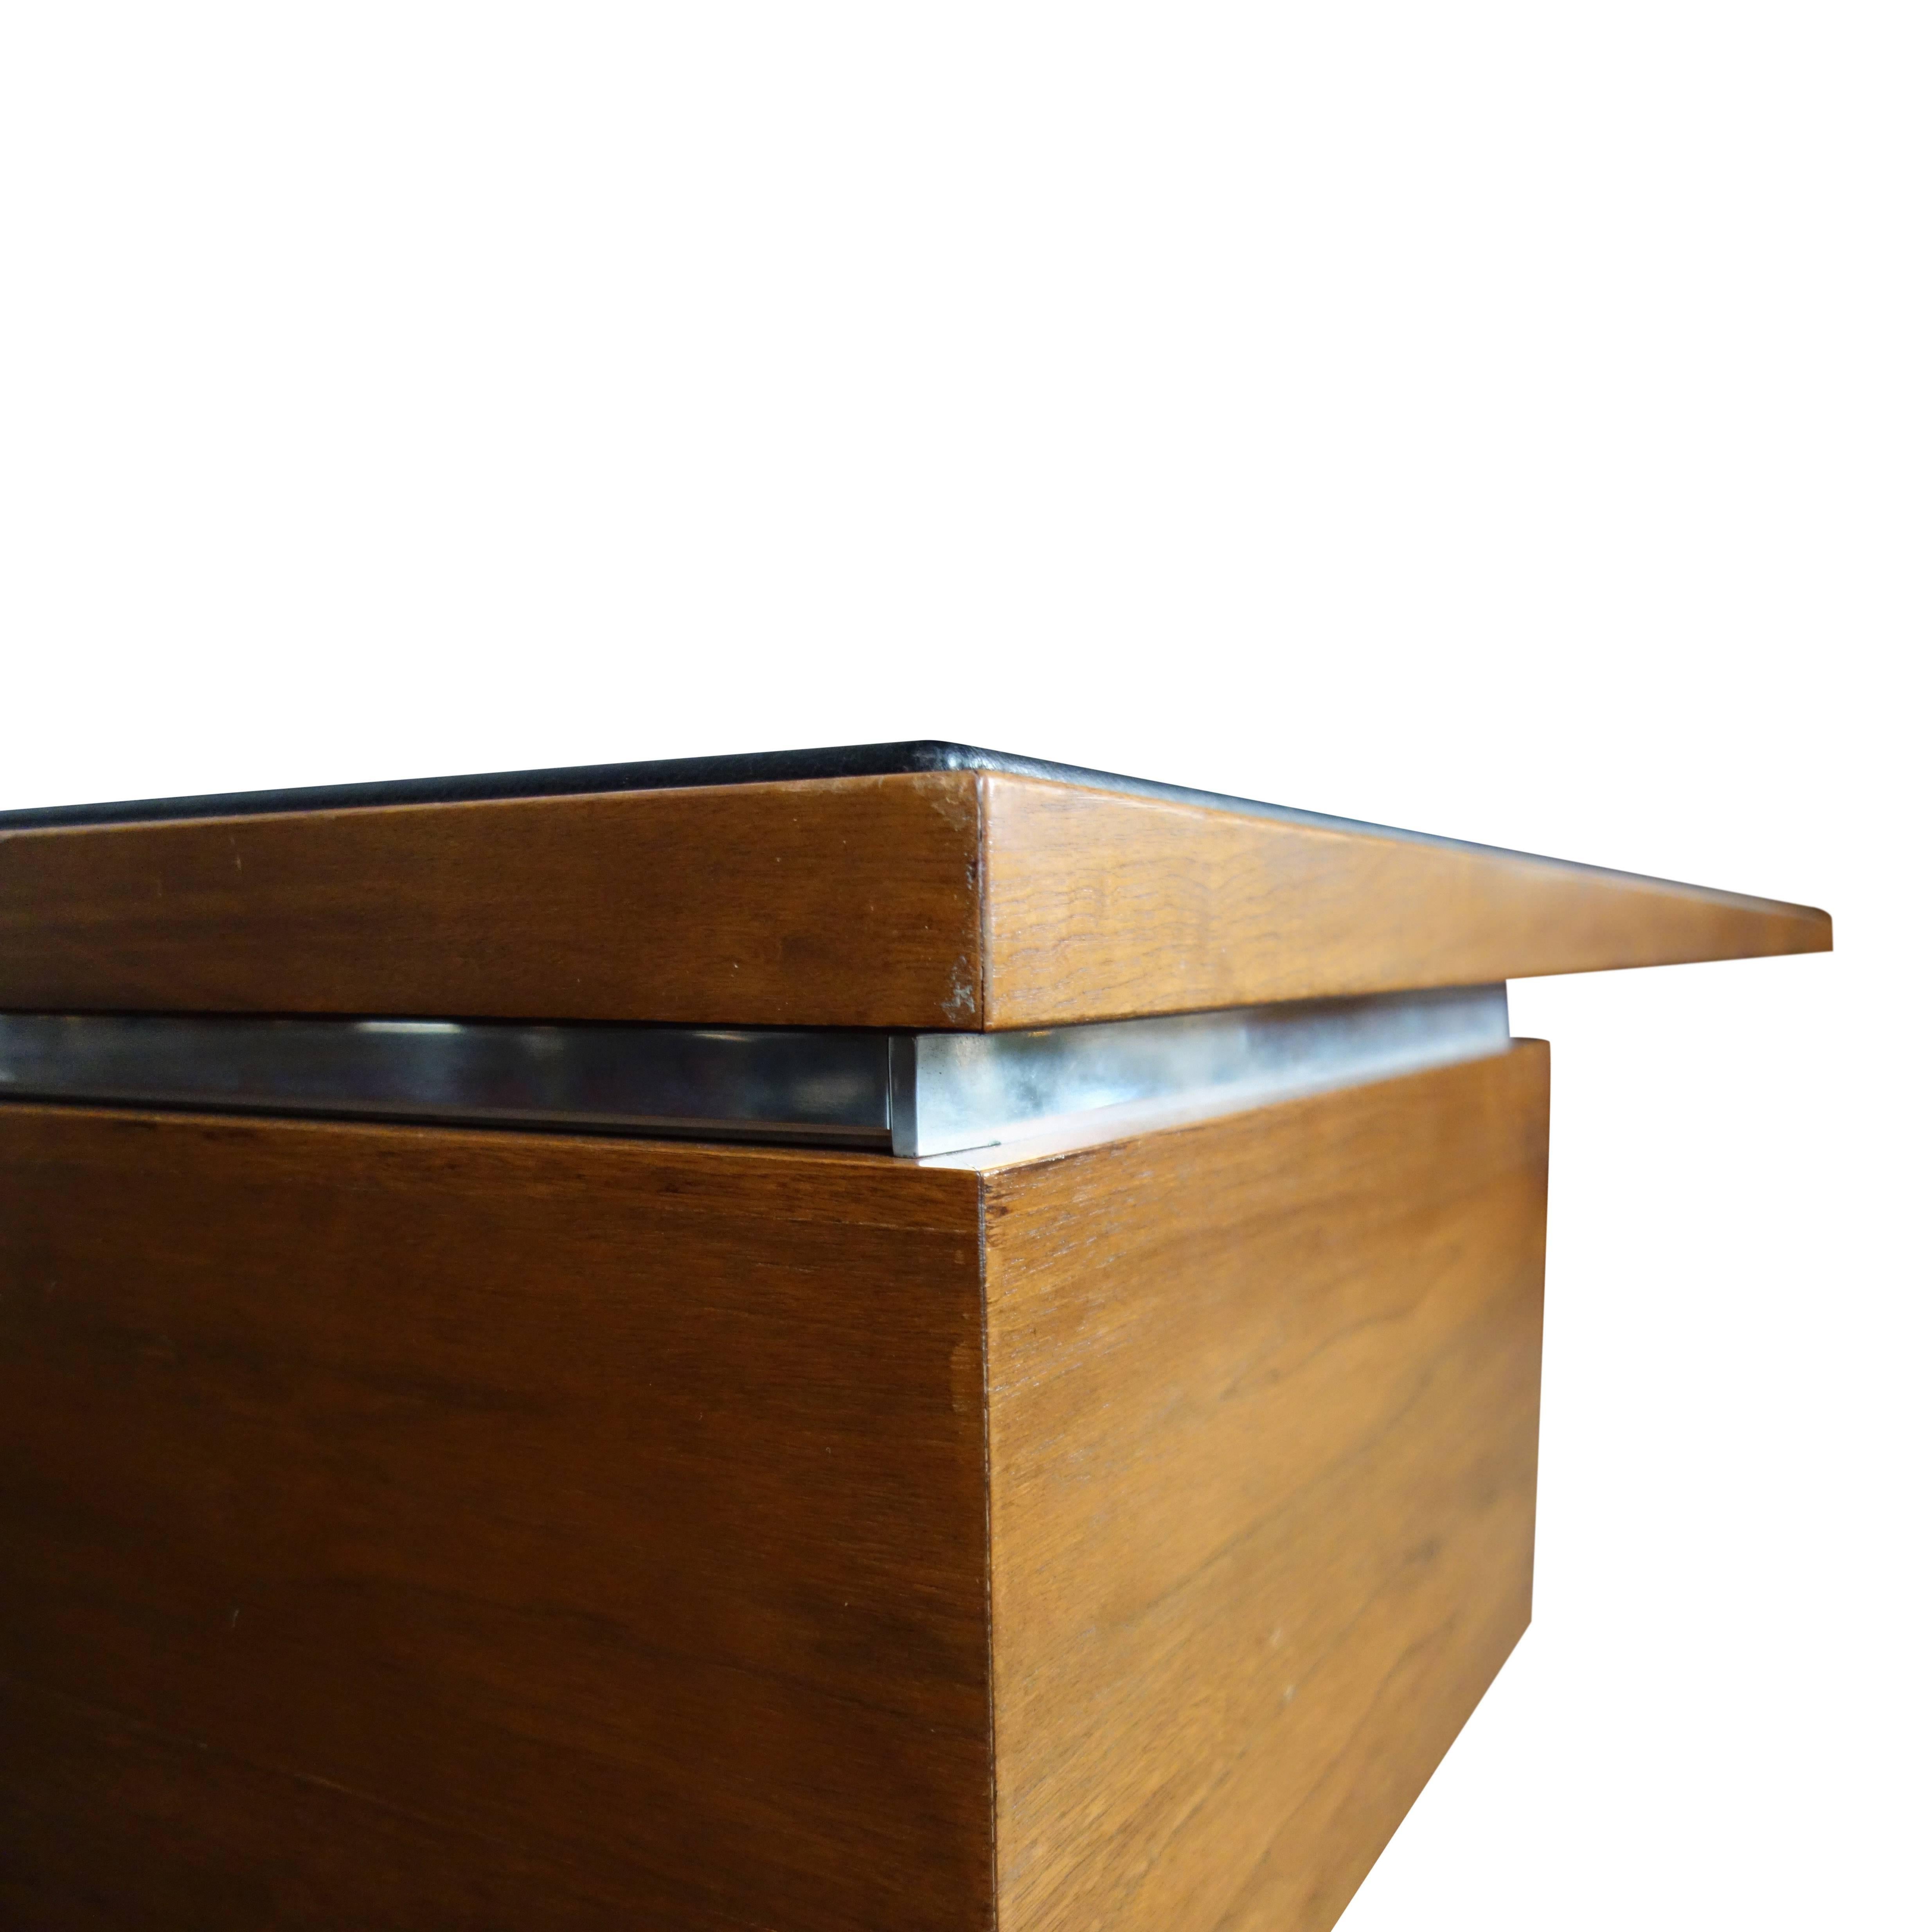 Late 20th Century Executive Desk by Warren Platner in Walnut for Lehigh Leopold